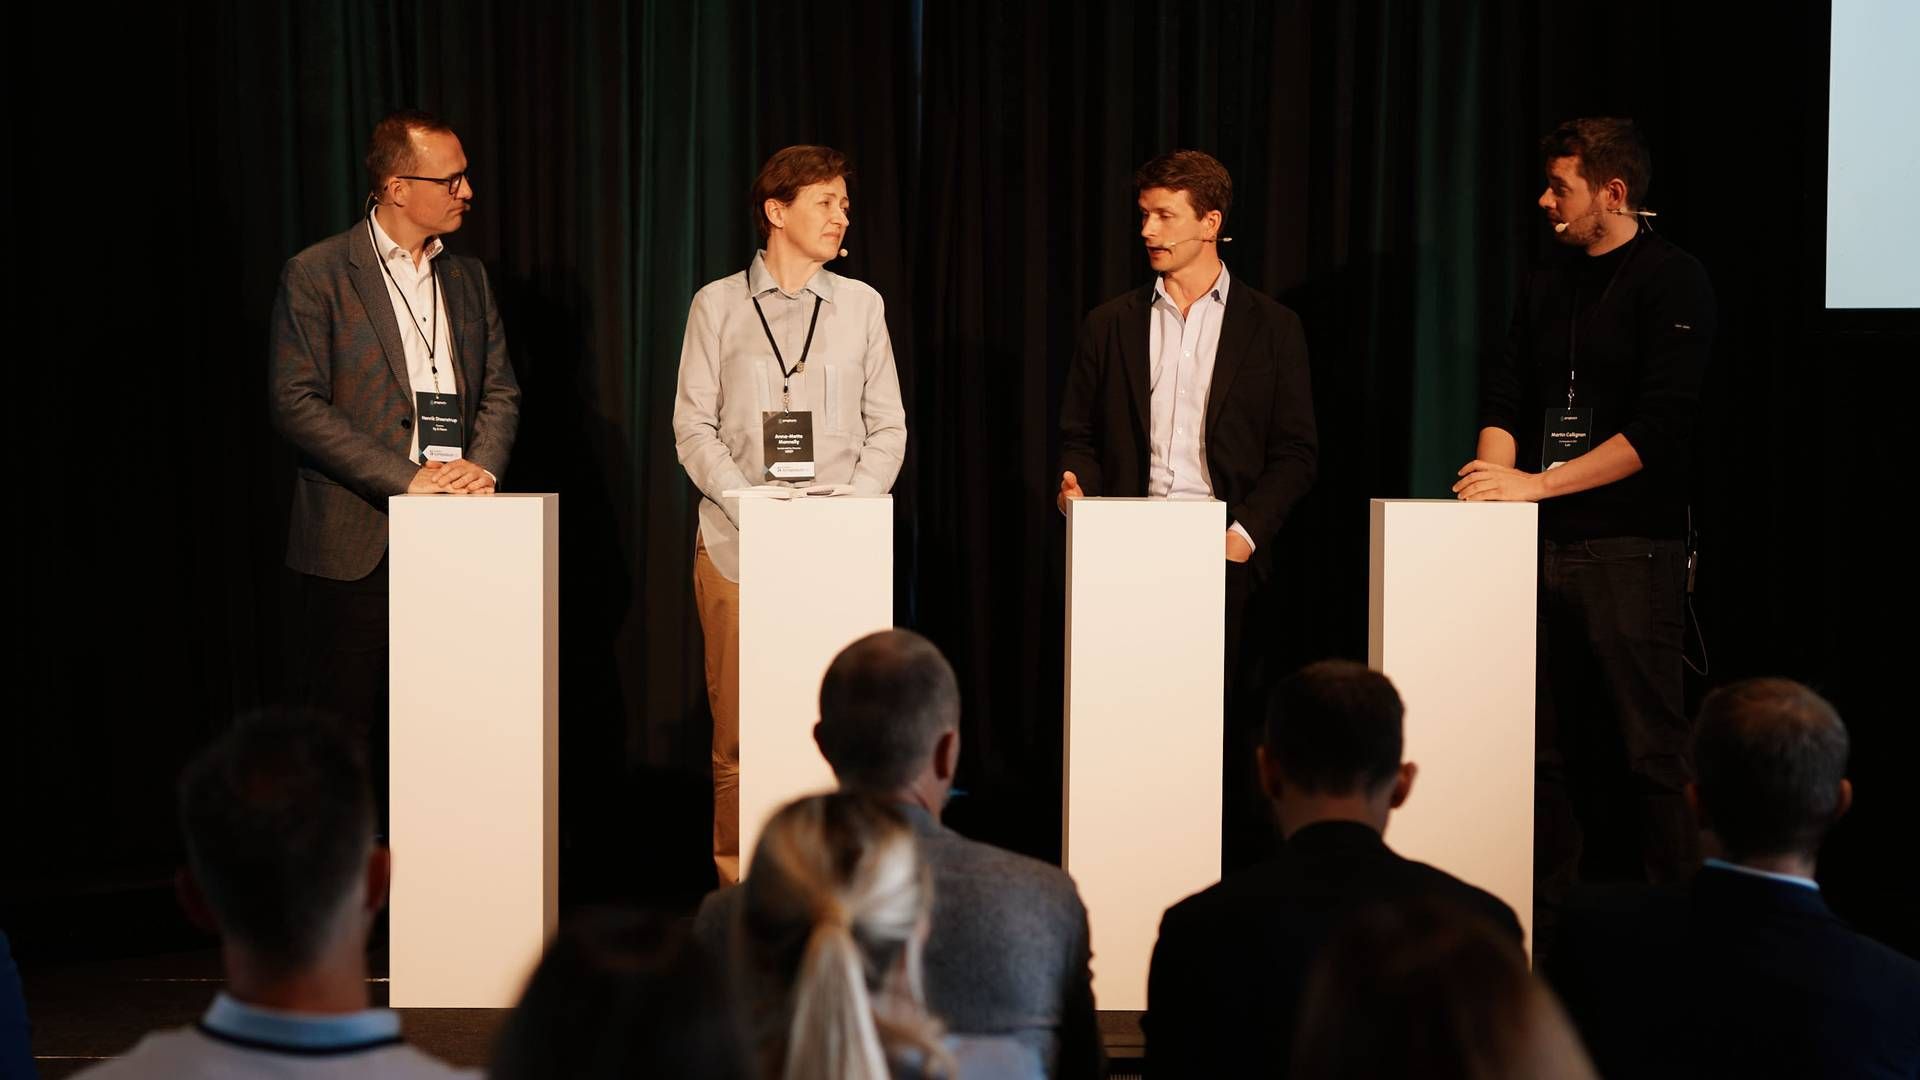 A panel discussion at PropTech Symposium on Monday focused on ESG. From the left side: Henrik Steenstrup from CPH City and Port Development, Anna-Mette Monnelly from NREP, Draniel Kraft from Stronghold Invest, and moderator Martin Collignon. | Photo: PR / Proptech Denmark / Rune Svenningsen